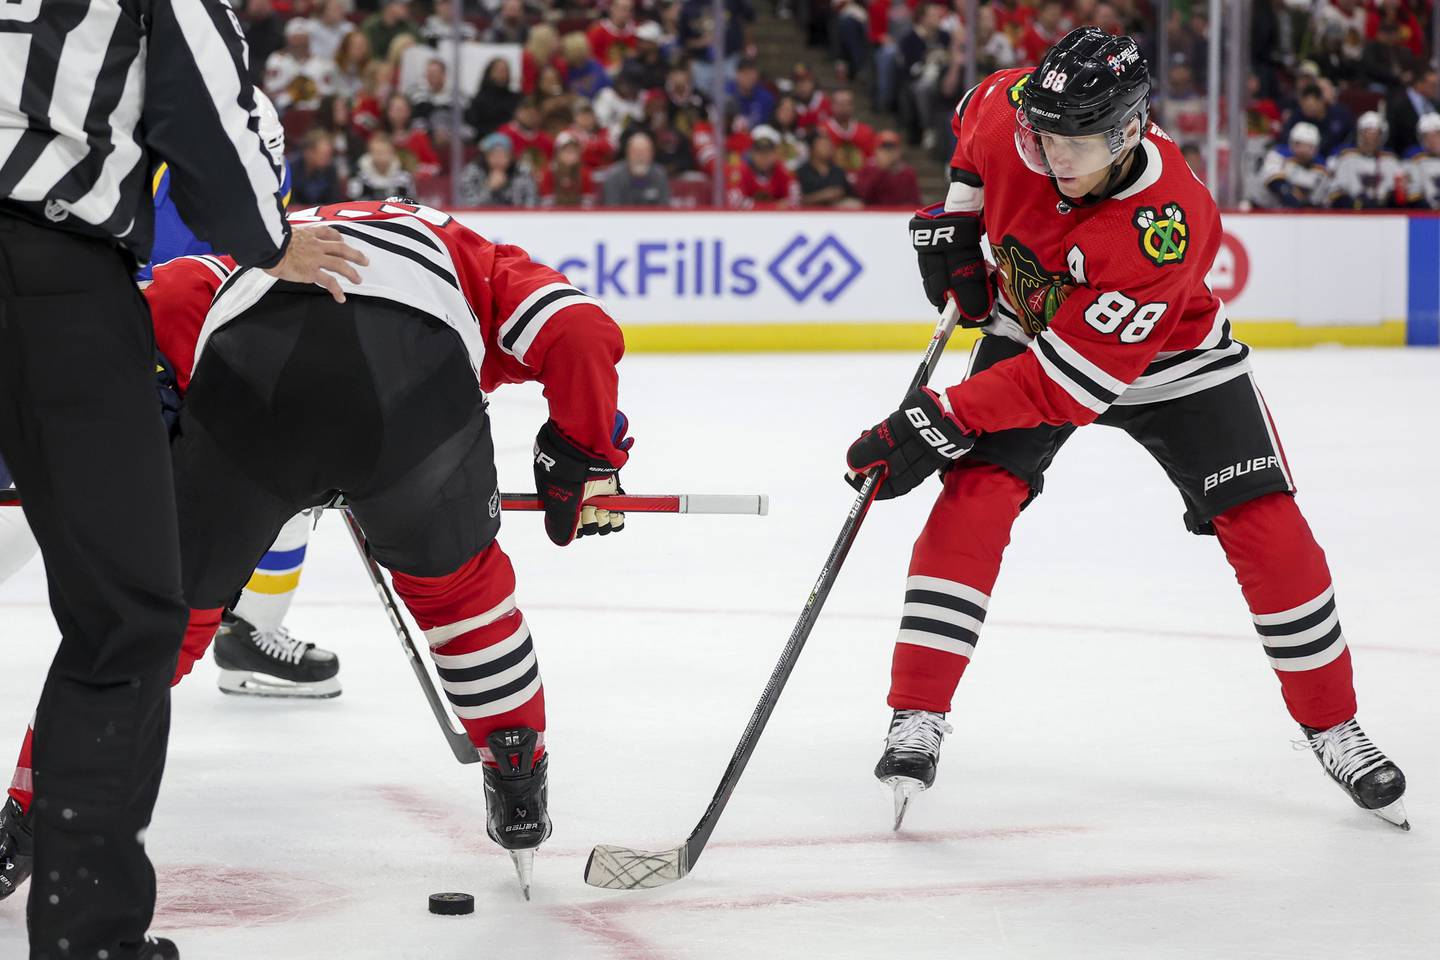 Blackhawks center Max Domi, left, and right wing Patrick Kane (88) try to gain possession of the puck during a preseason game against the Blues on Sept. 27, 2022, at the United Center.